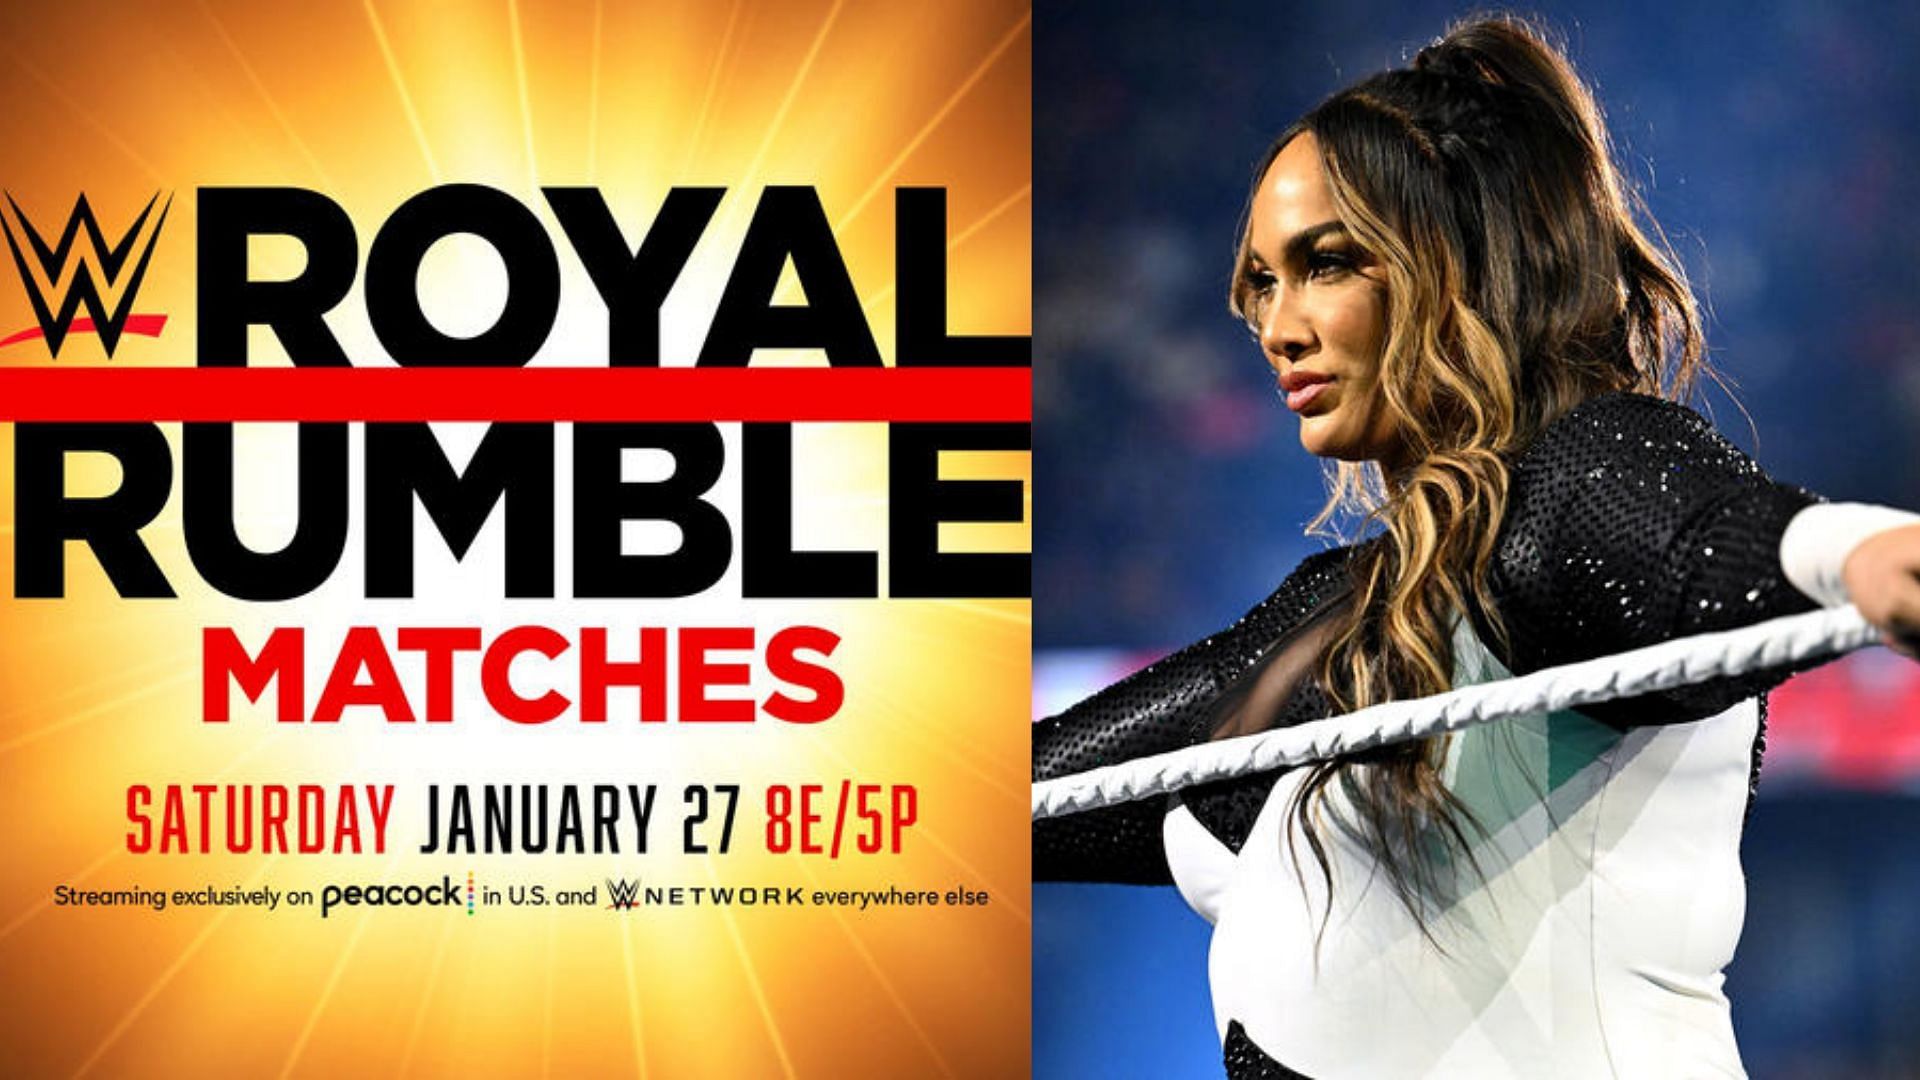 There might be some big surprises for the Royal Rumble